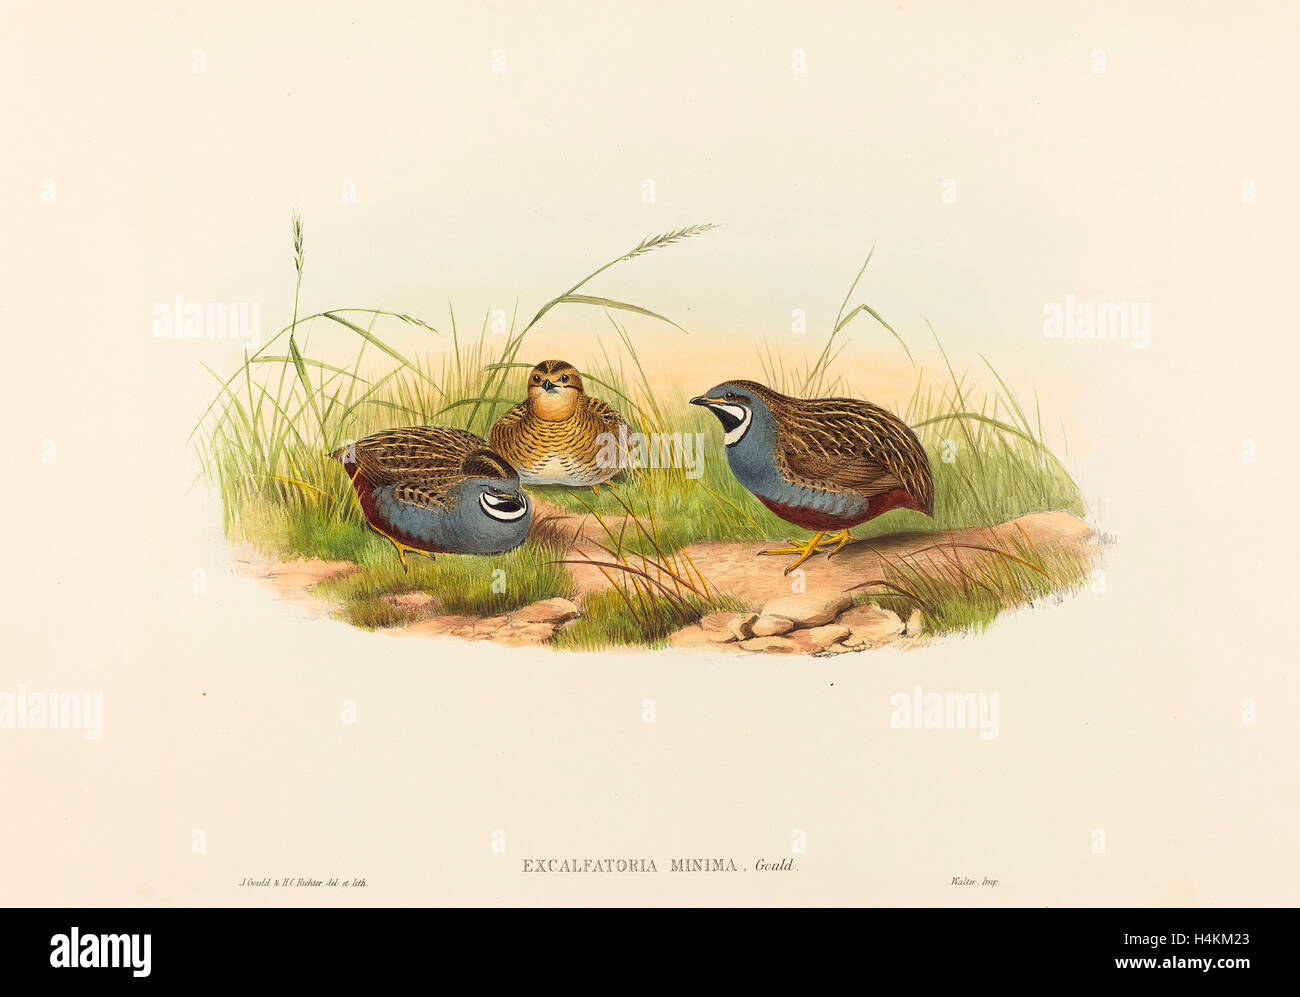 John Gould and H.C. Richter (British (?), active 1841 - active c. 1881), Excalftoria minima (Blue-breasted Quail), hand-colored Stock Photo